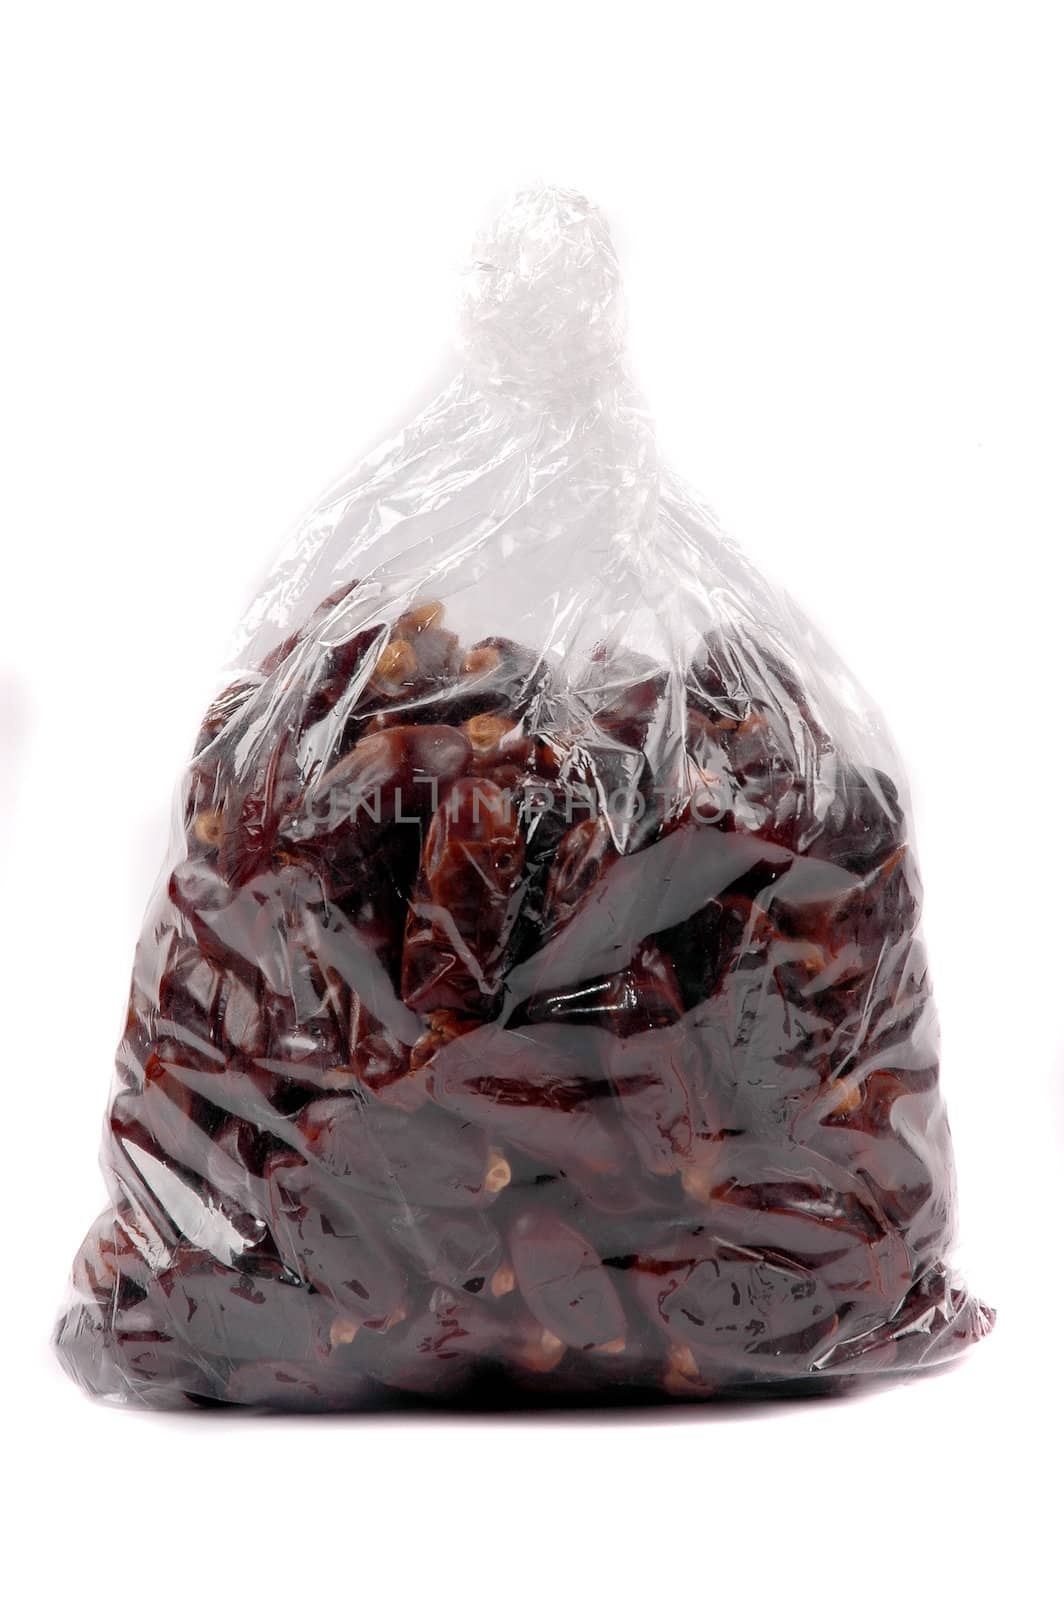 date palm fruit in a plastic bag packaging isolated on white background